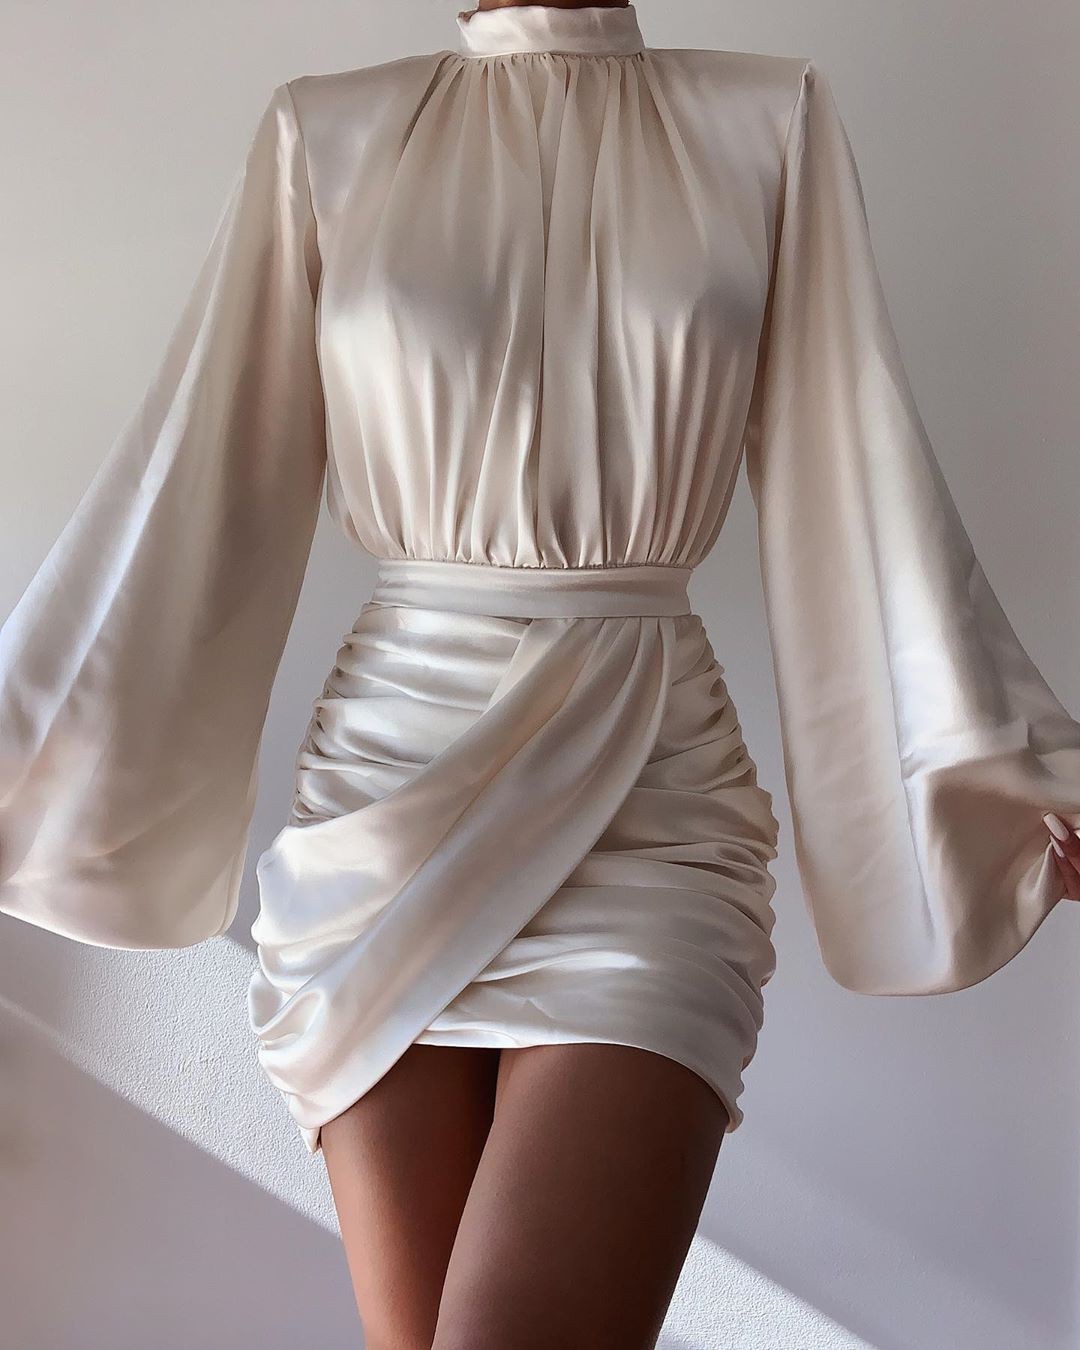 white outfit ideas with silk cocktail dress, fashion ideas